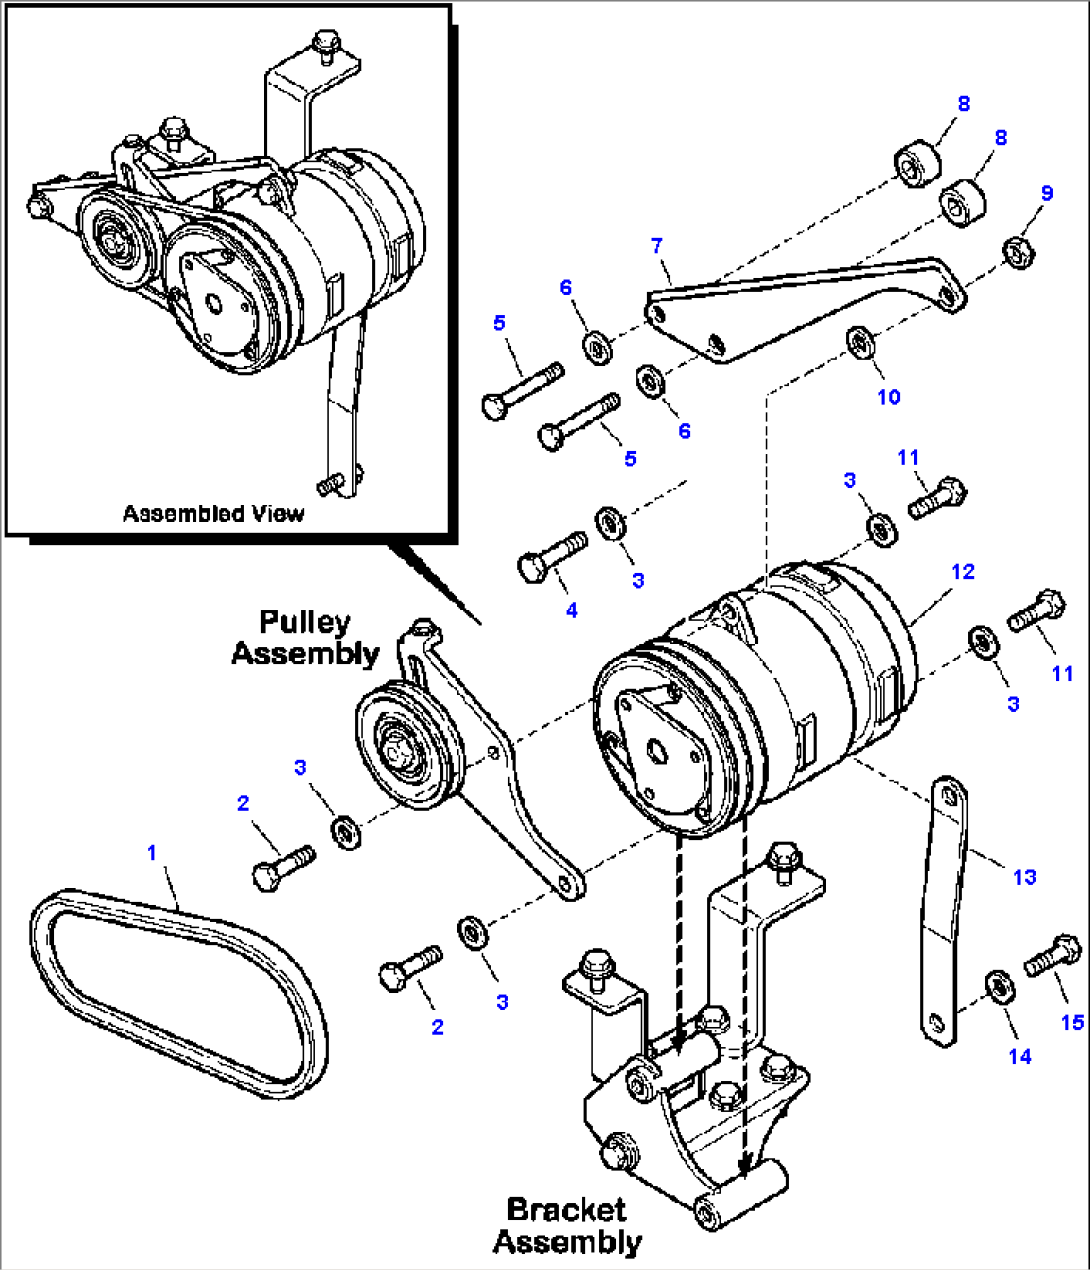 K5021-01A4 AIR CONDITIONING SYSTEM COMPRESSOR AND MOUNTING